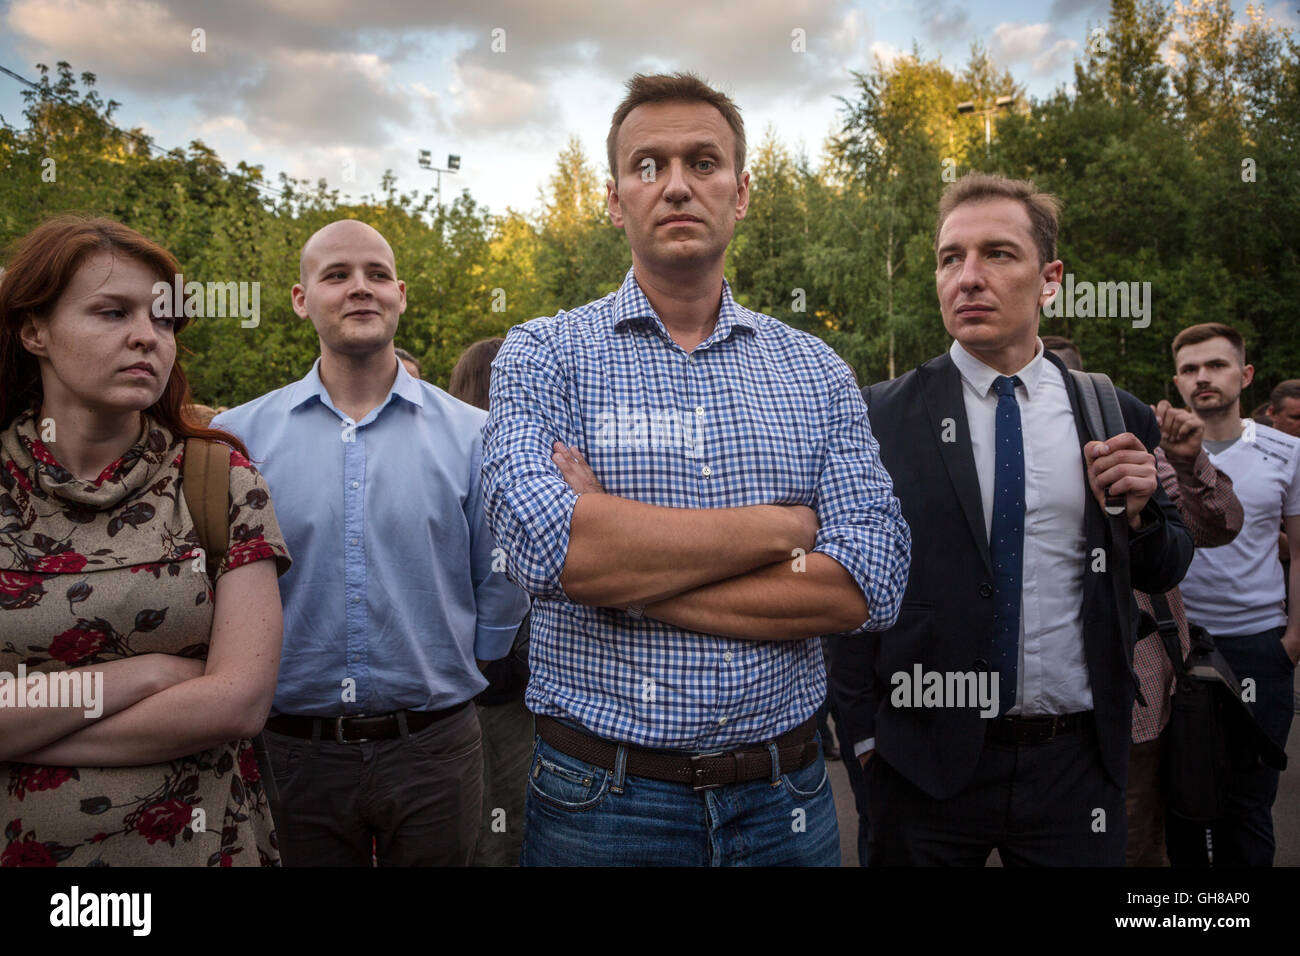 Moscow, Russia. 09 of August, 2016. Kira Yarmysh, Vladlen Los, Alexei Navalny, Roman Rubanov (from left to right) take part of protest against 'The Yarovaya law package' restricting Internet privacy during opposition rally in central park Sokolniki in Moscow, Russia Credit:  Nikolay Vinokurov/Alamy Live News Stock Photo